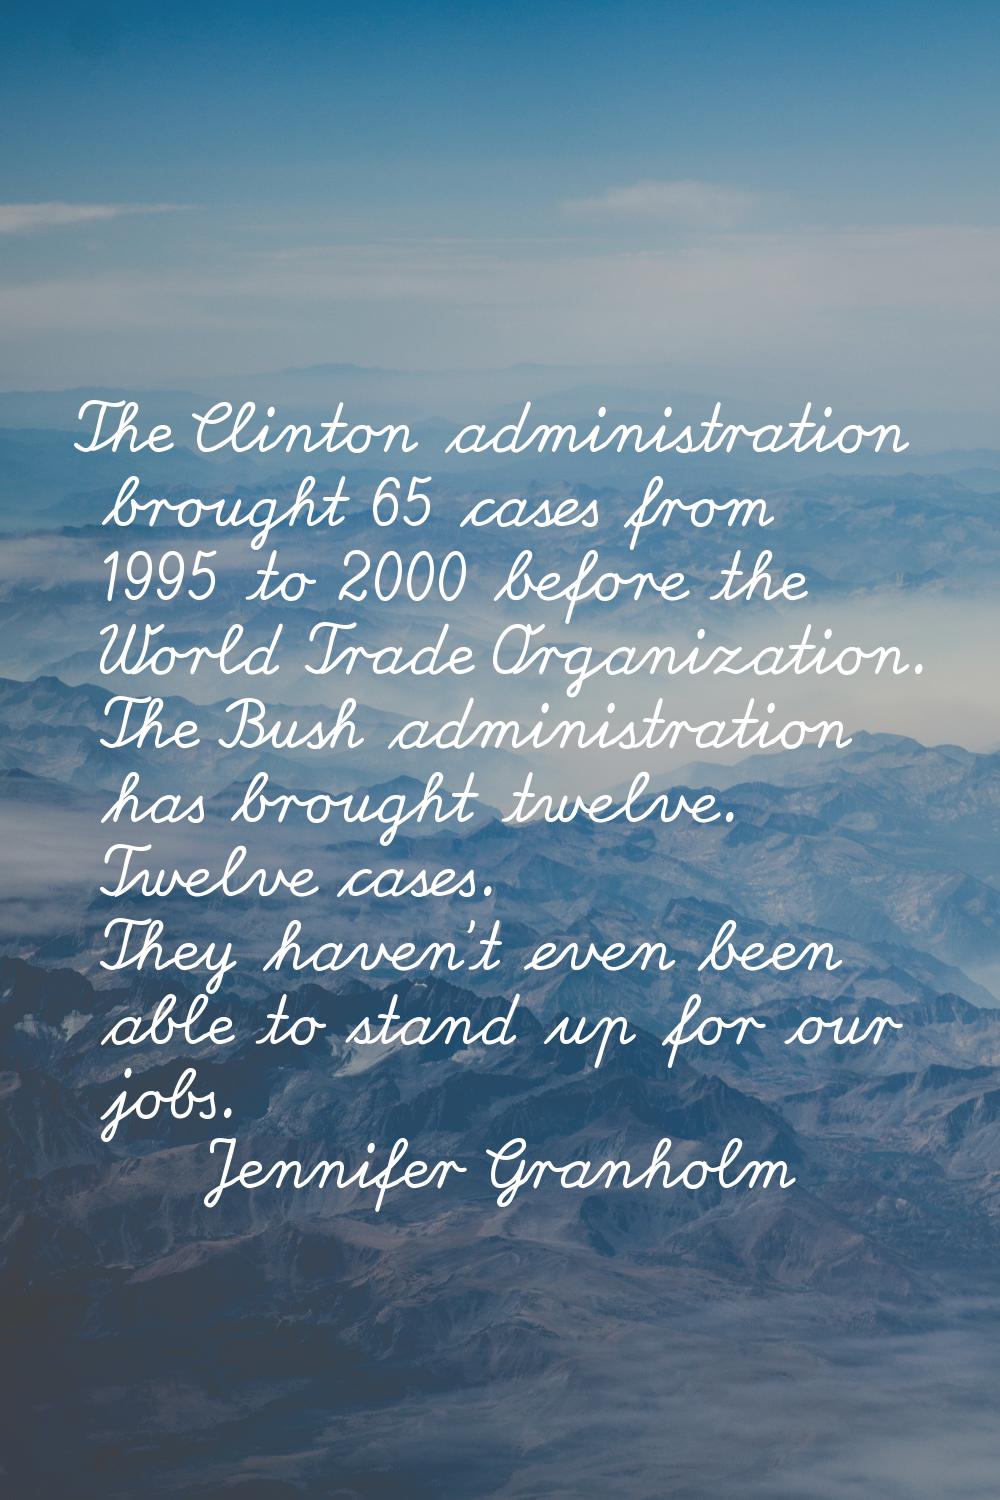 The Clinton administration brought 65 cases from 1995 to 2000 before the World Trade Organization. 